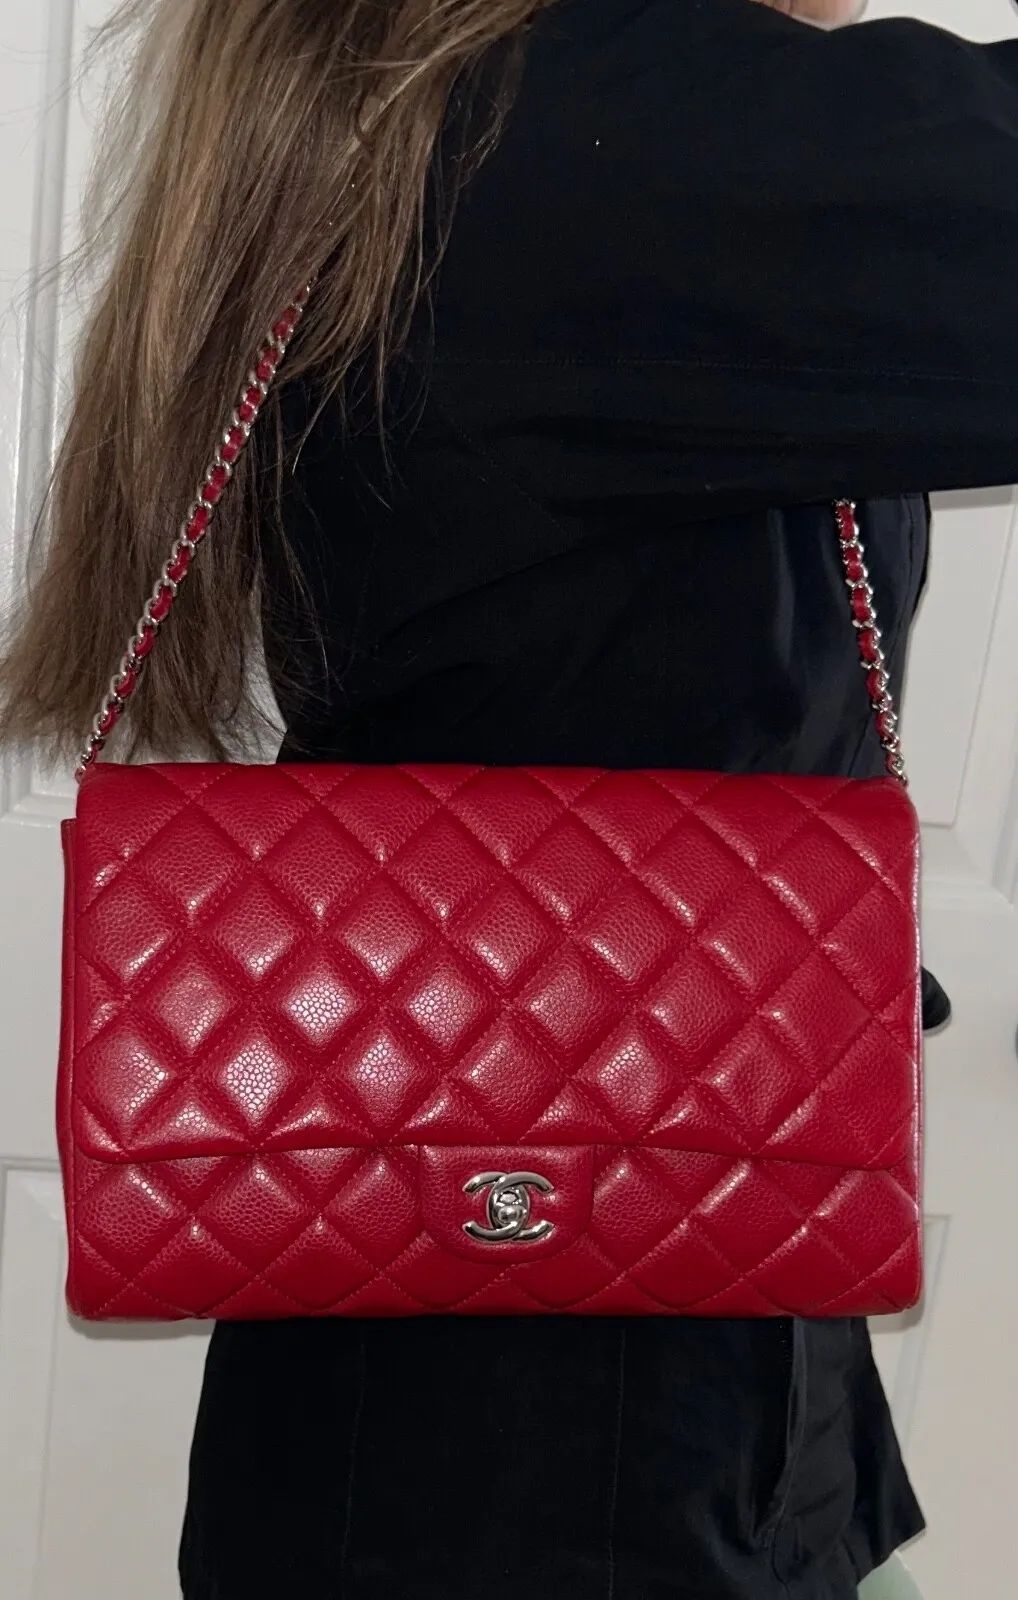 CHANEL Classic CC Quilted Flap Shoulder Bag Caviar Leather Dark Red  | eBay | eBay US